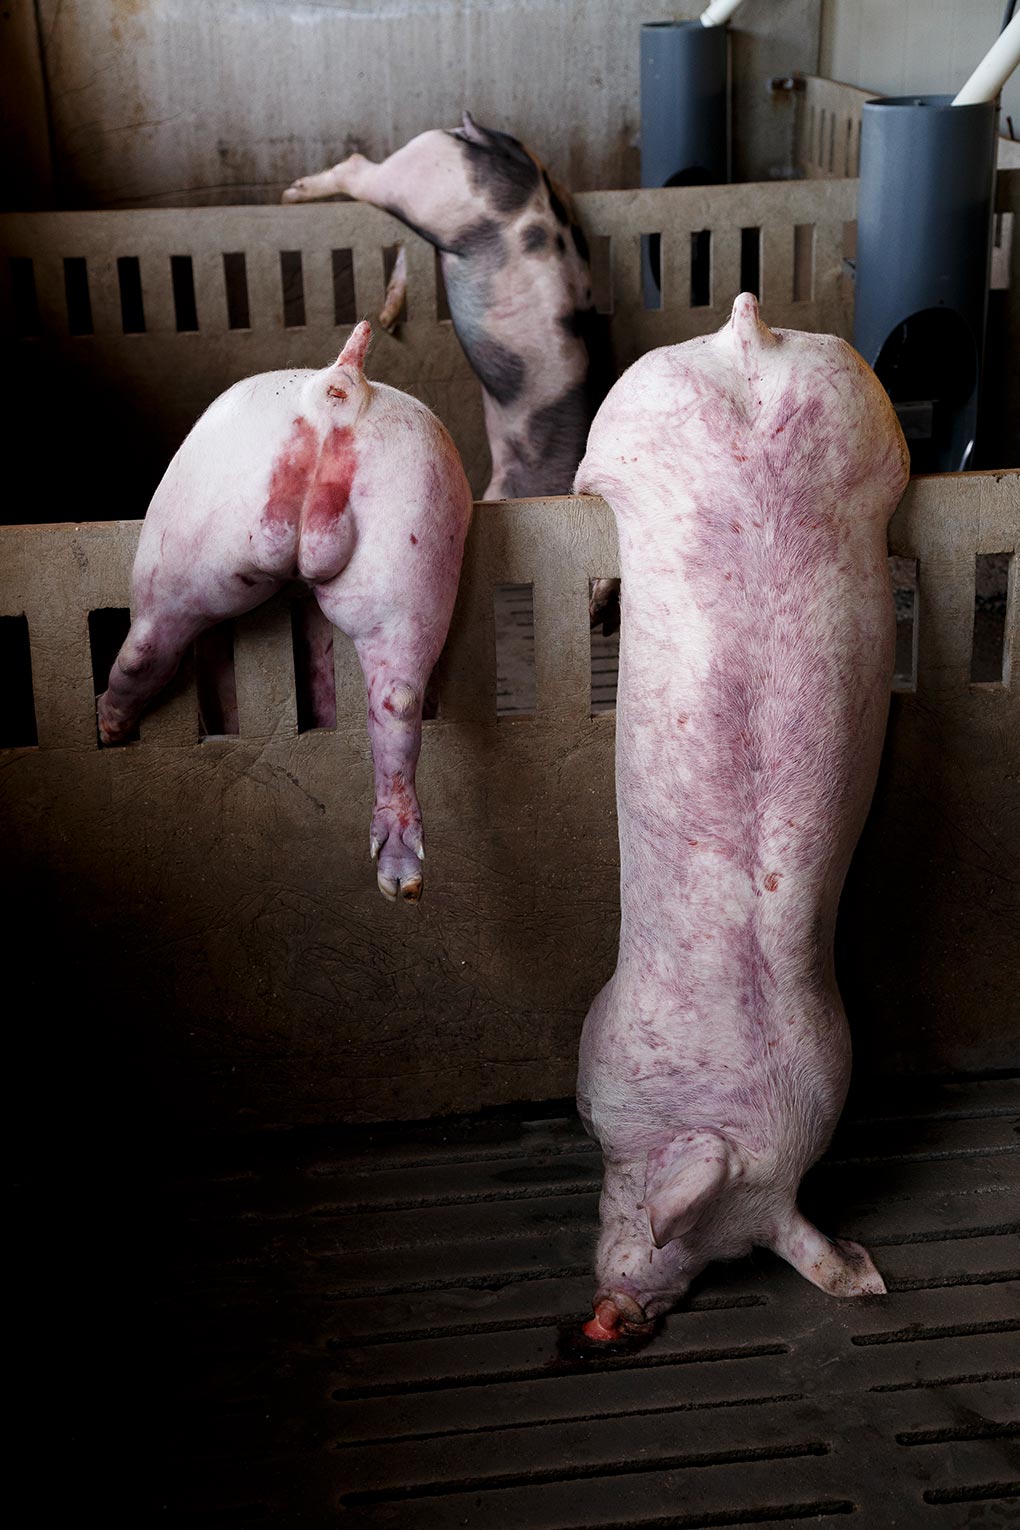 Bodies of drowned pigs inside of a farm.